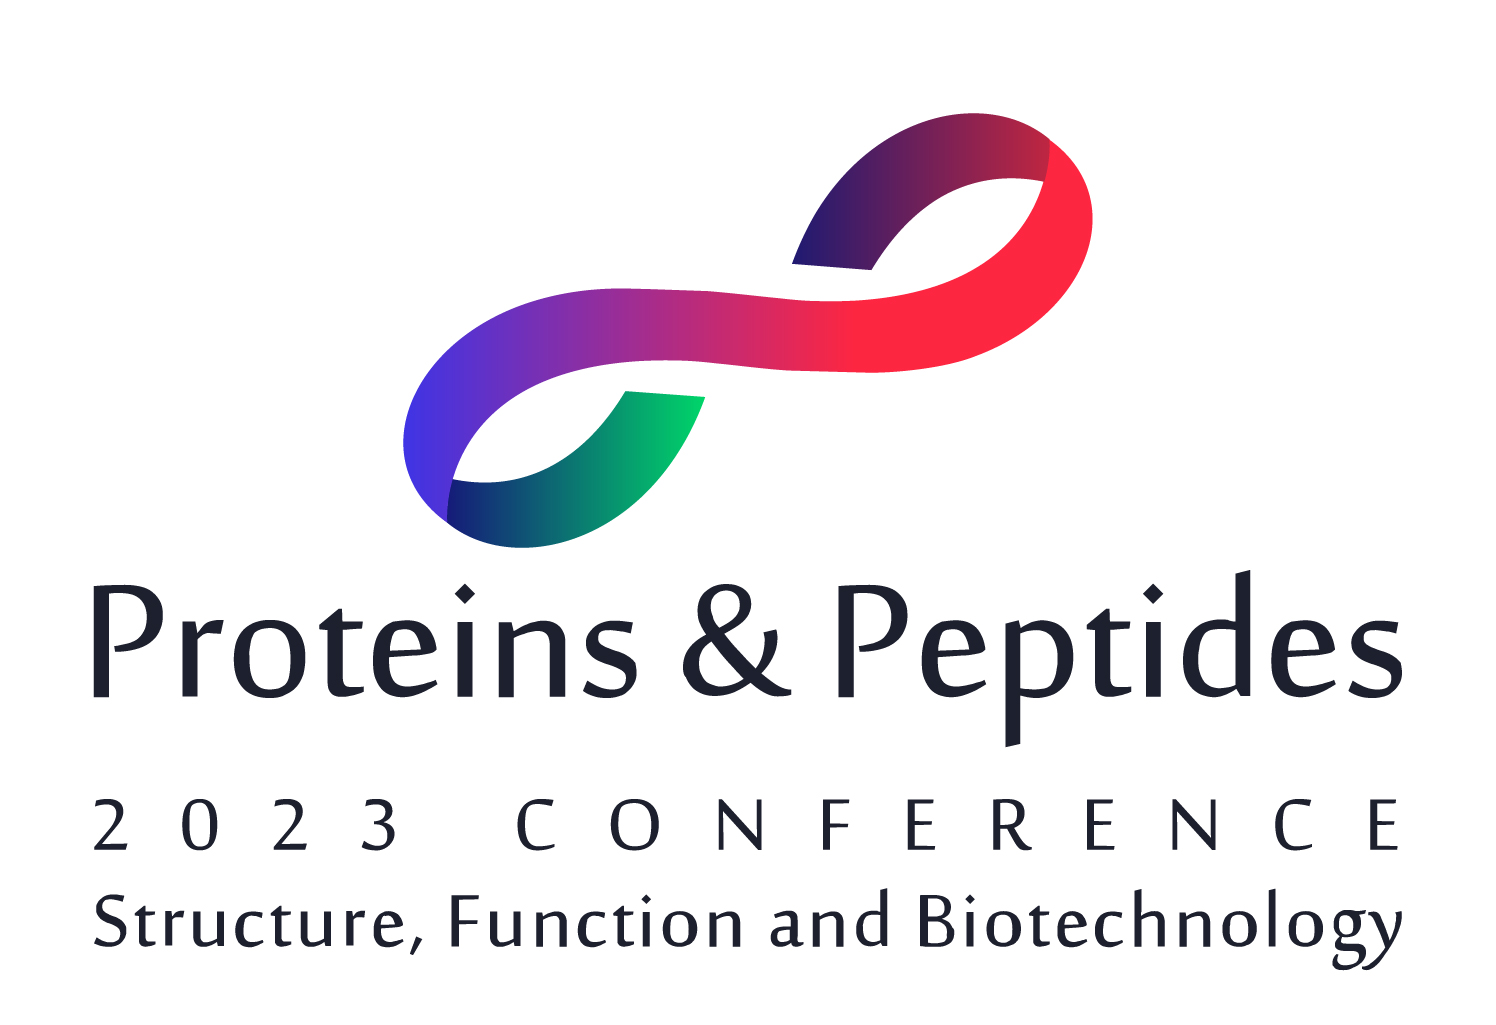 Proteins & Peptides Conference 2023